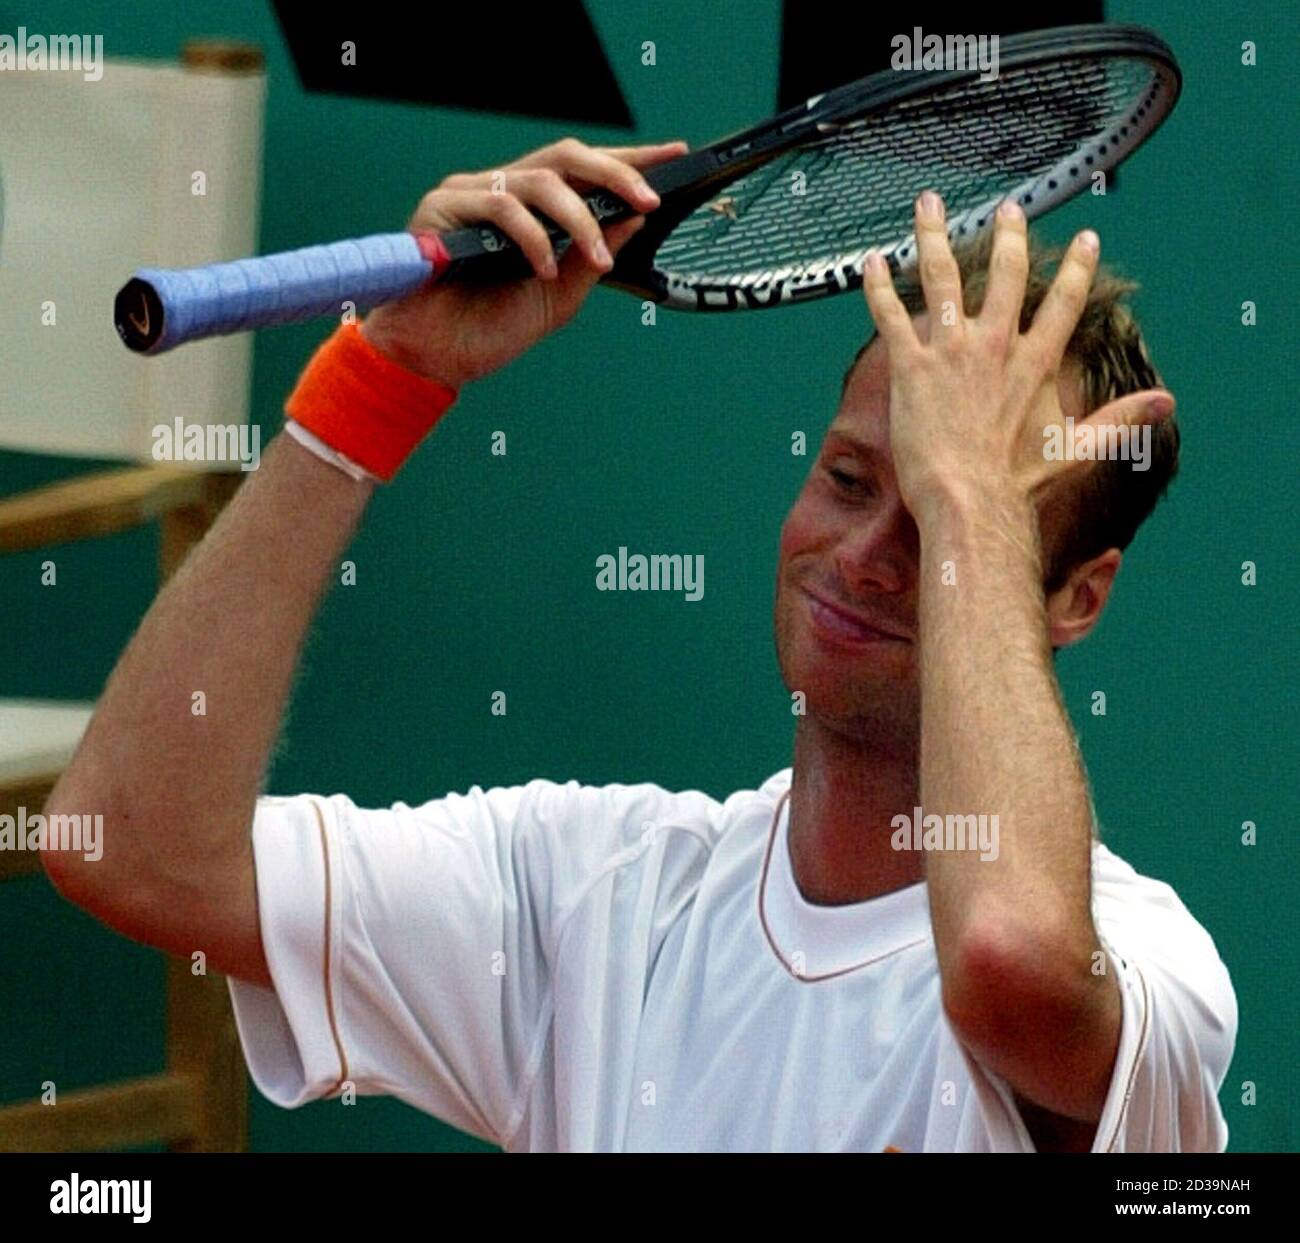 Martin Verkerk of the Netherlands reacts after losing a point during his  match against Juan Carlos Ferrero of Spain in the final of the French tennis  open at Roland Garros stadium in